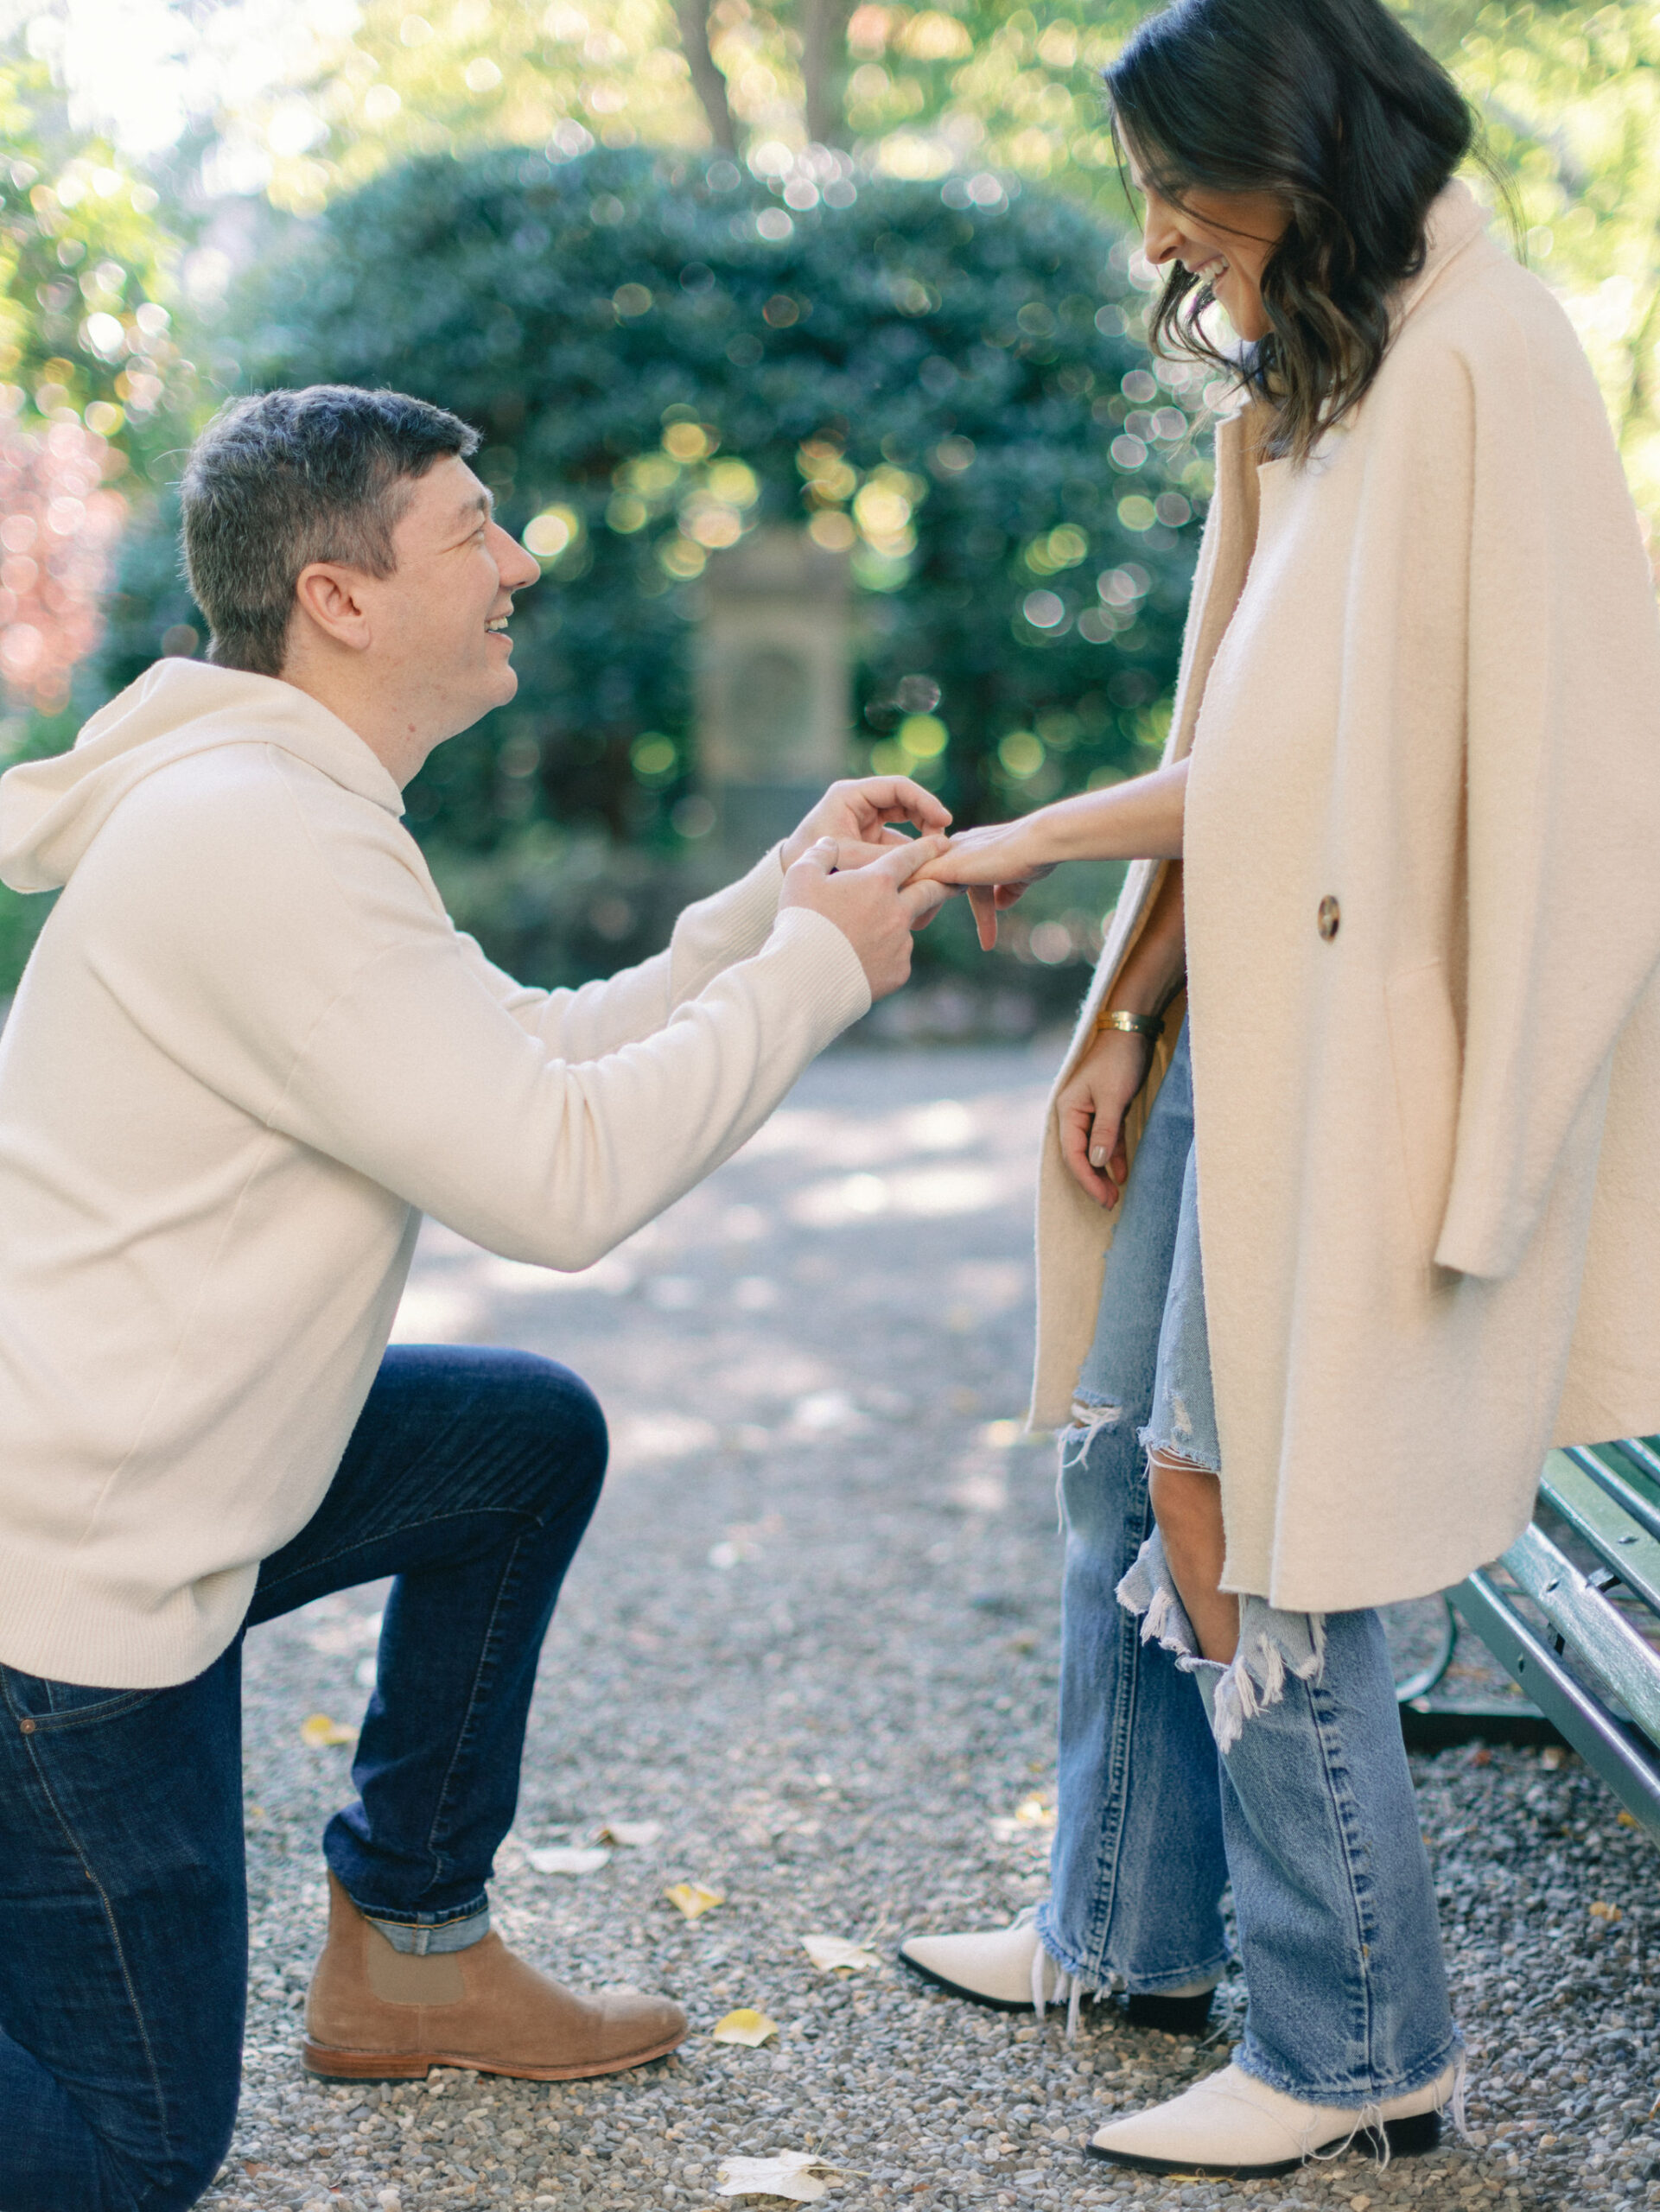 Marriage proposal in Gramercy Park, New York City